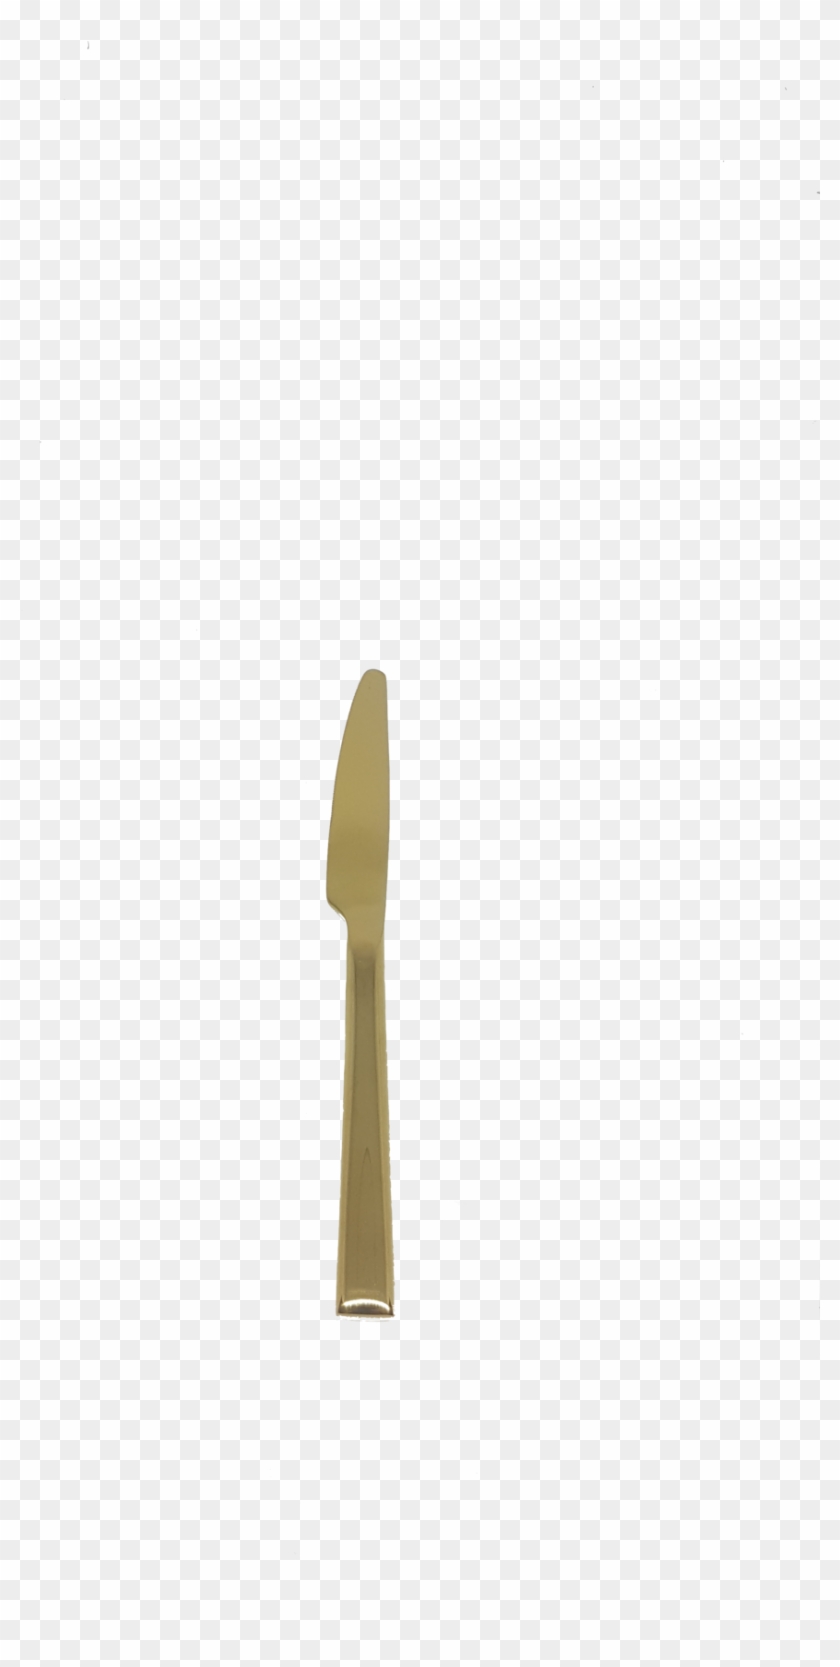 Gold Cutlery Knife Available For Hire - Knife Clipart #2162752